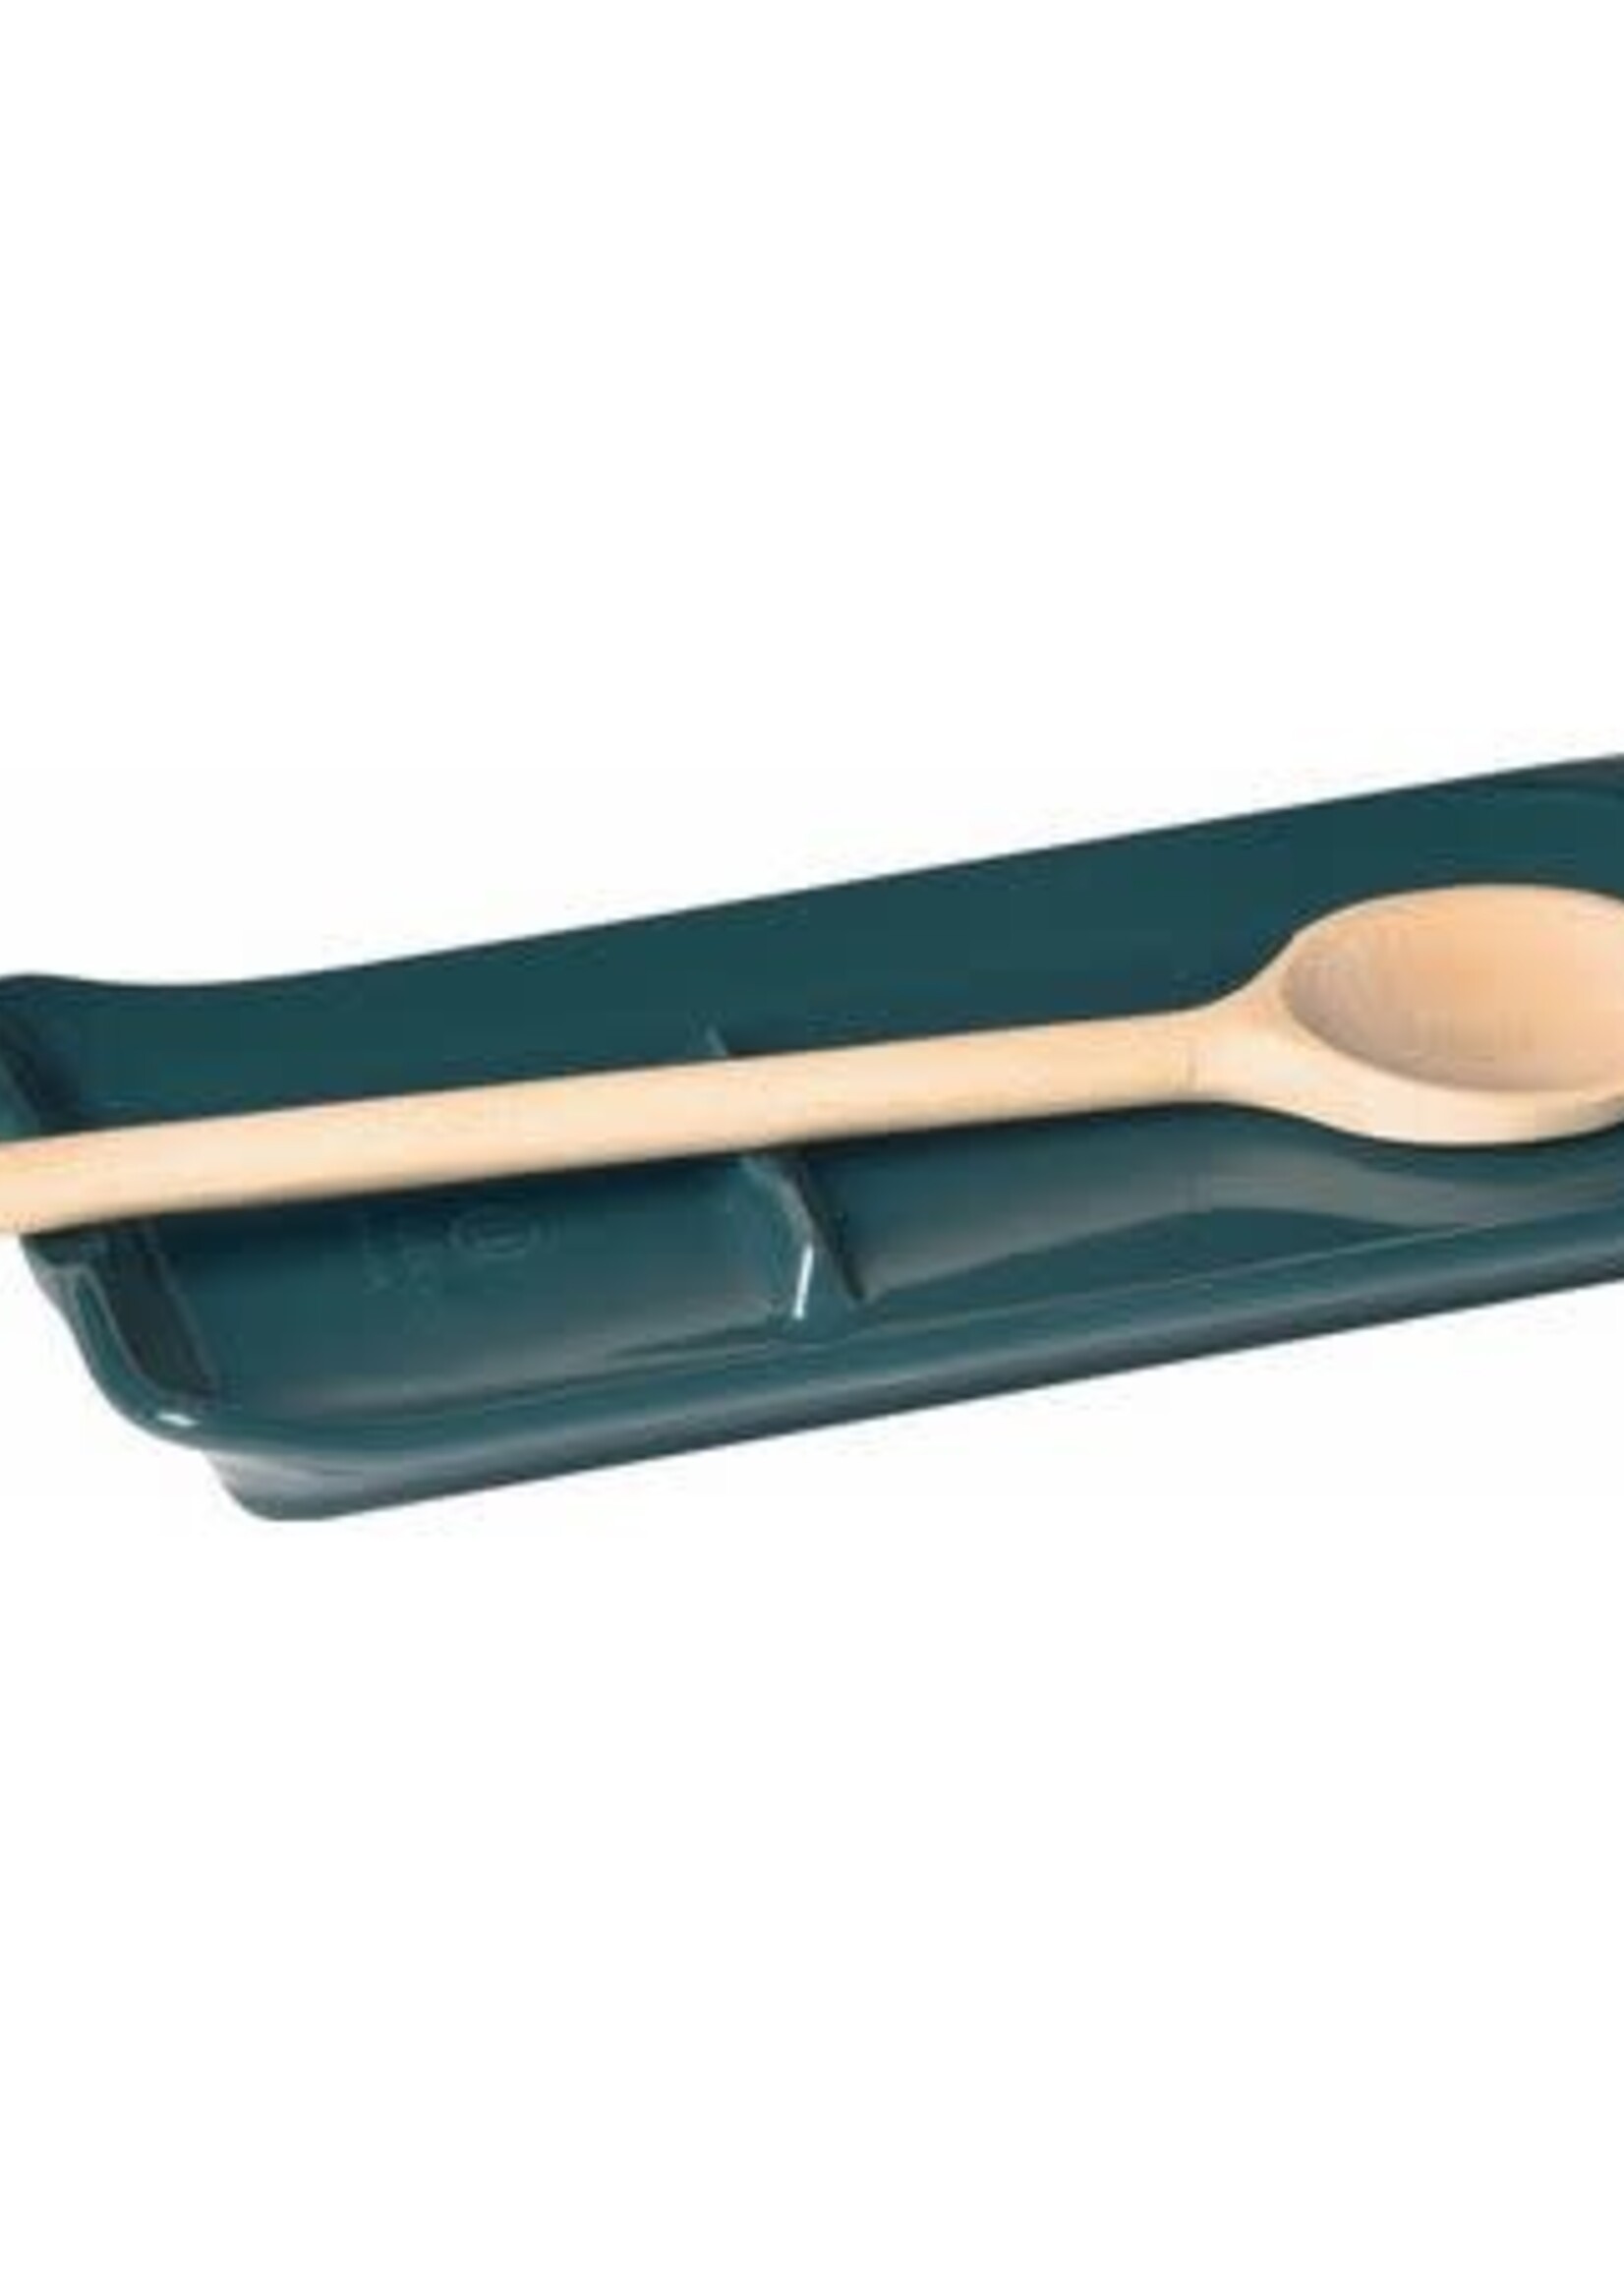 Emile Henry EH Spoon Rest